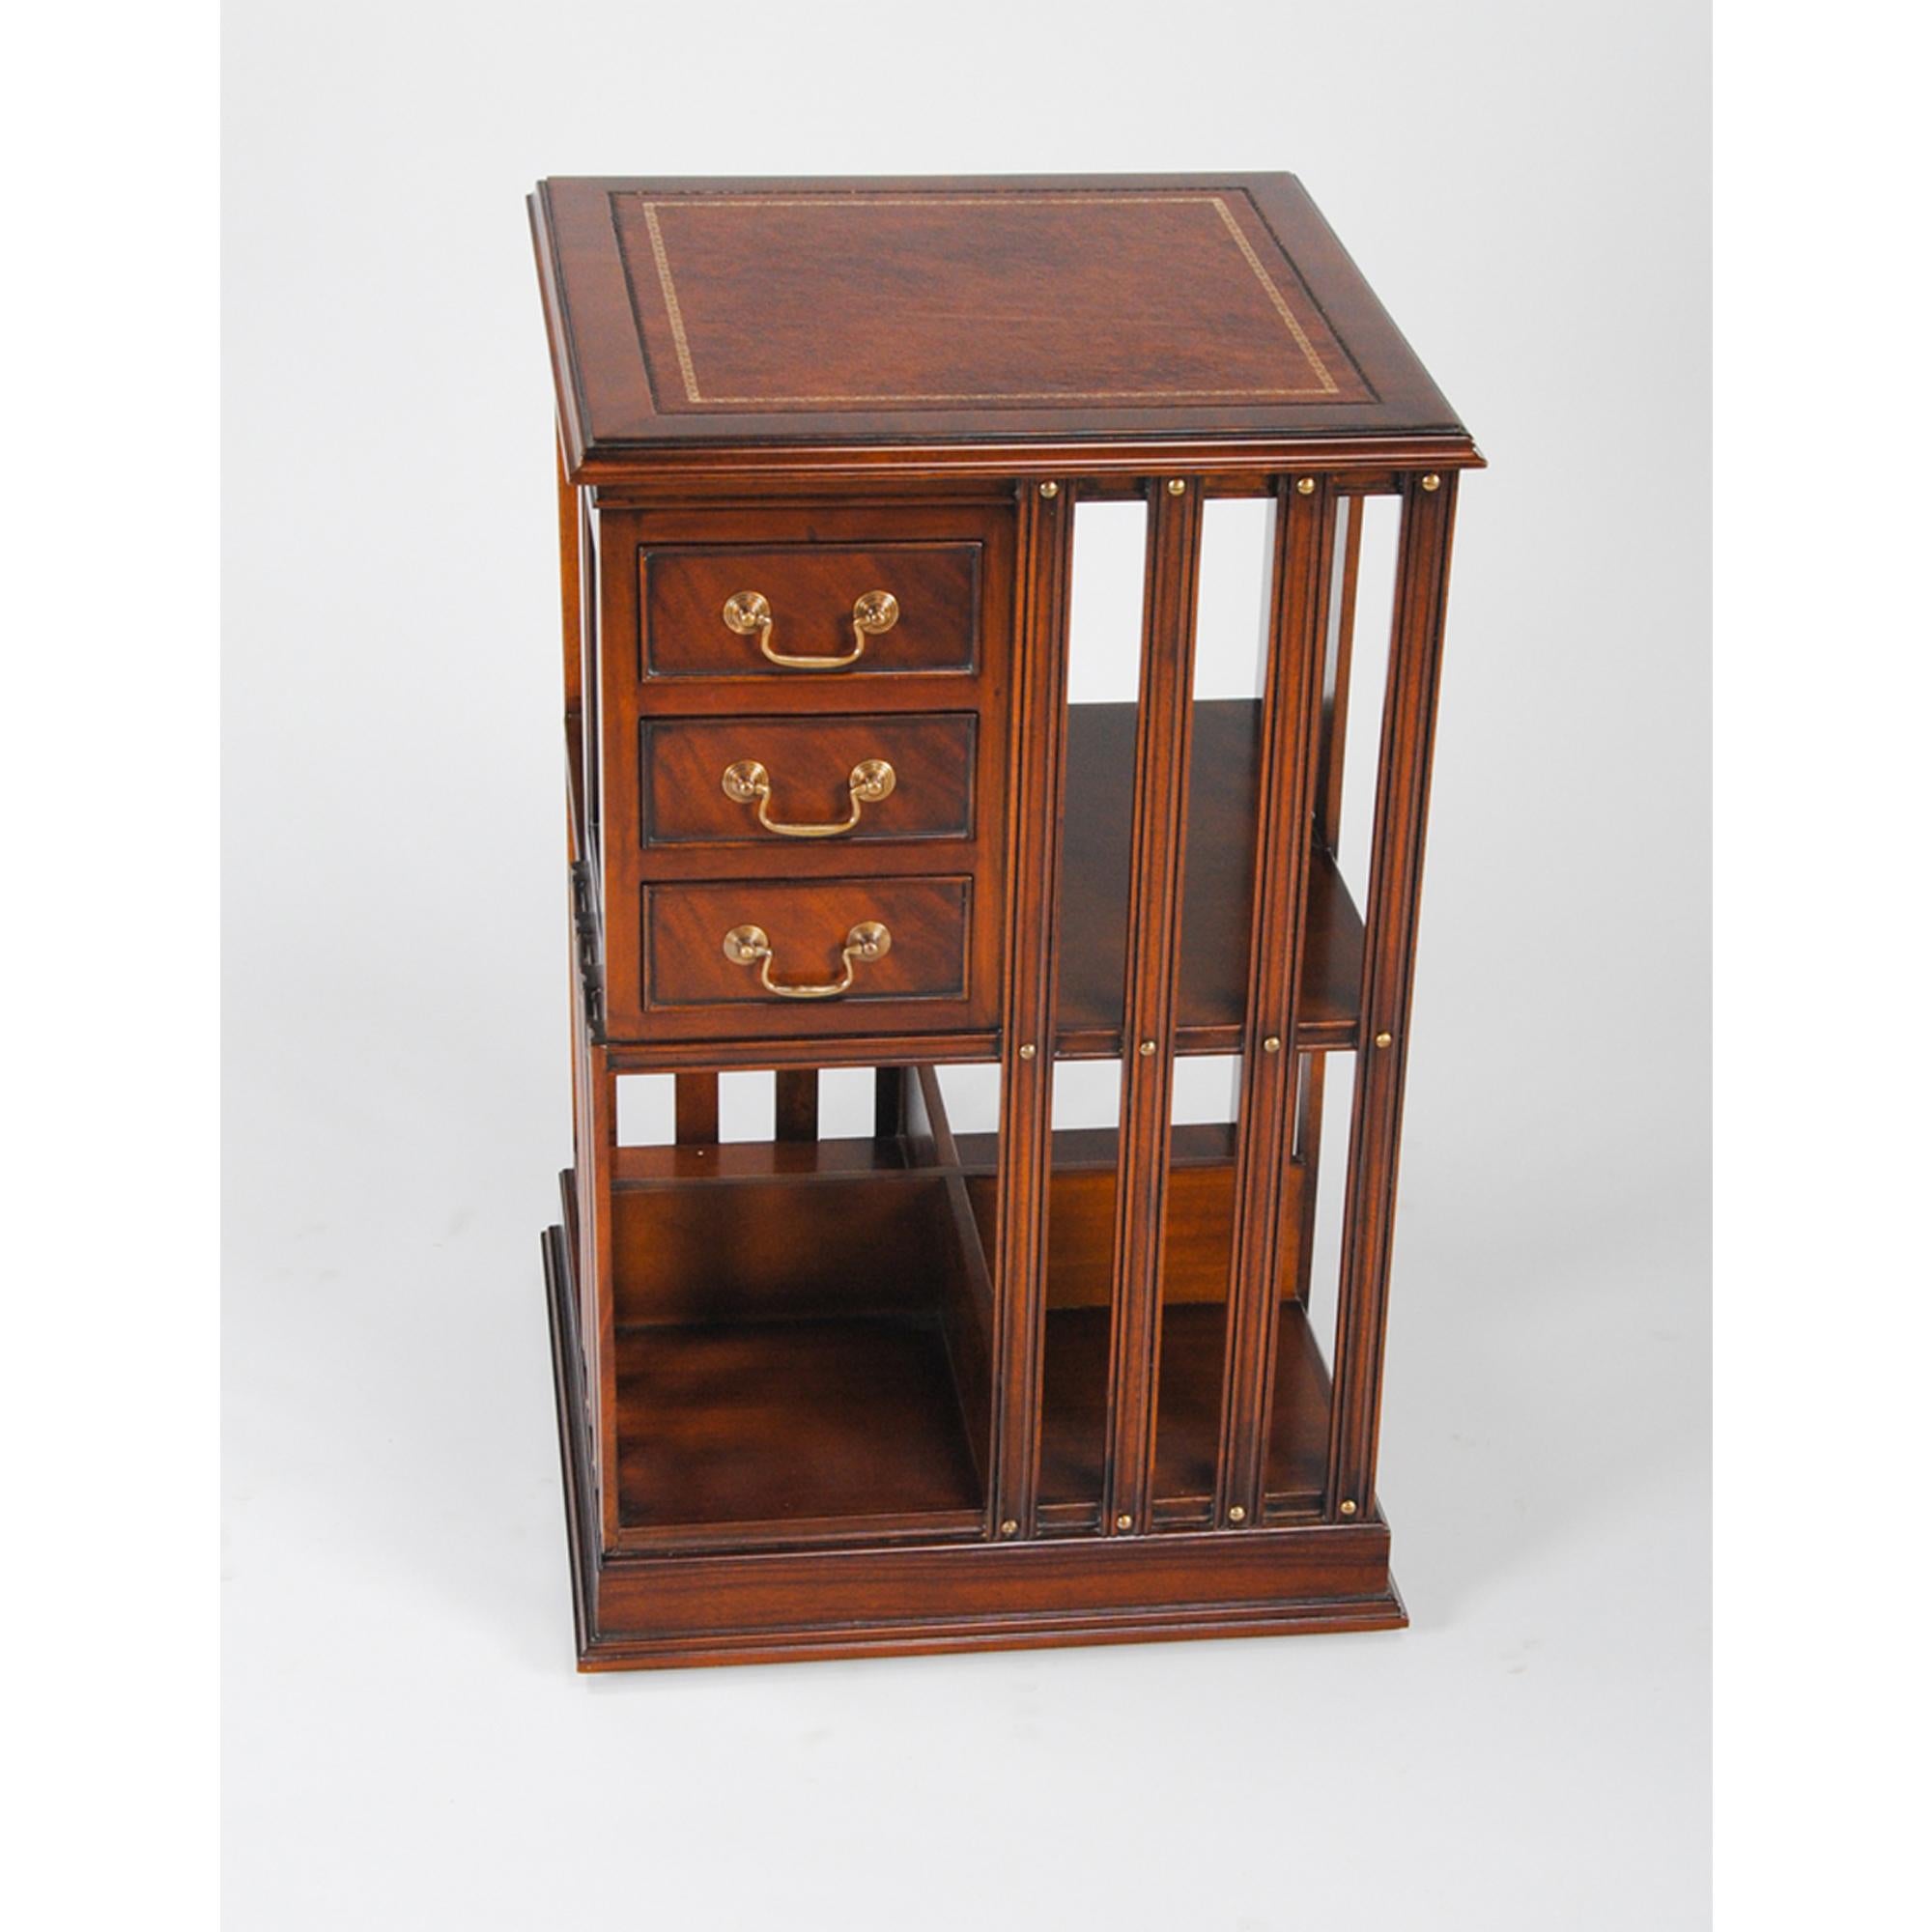 A Leather Top Revolving Bookcase from Niagara Furniture with full grain leather top with a shaped molding surround, over top three dovetailed drawers and numerous supported storage spaces, all accented with brass headed screws and hardware. The